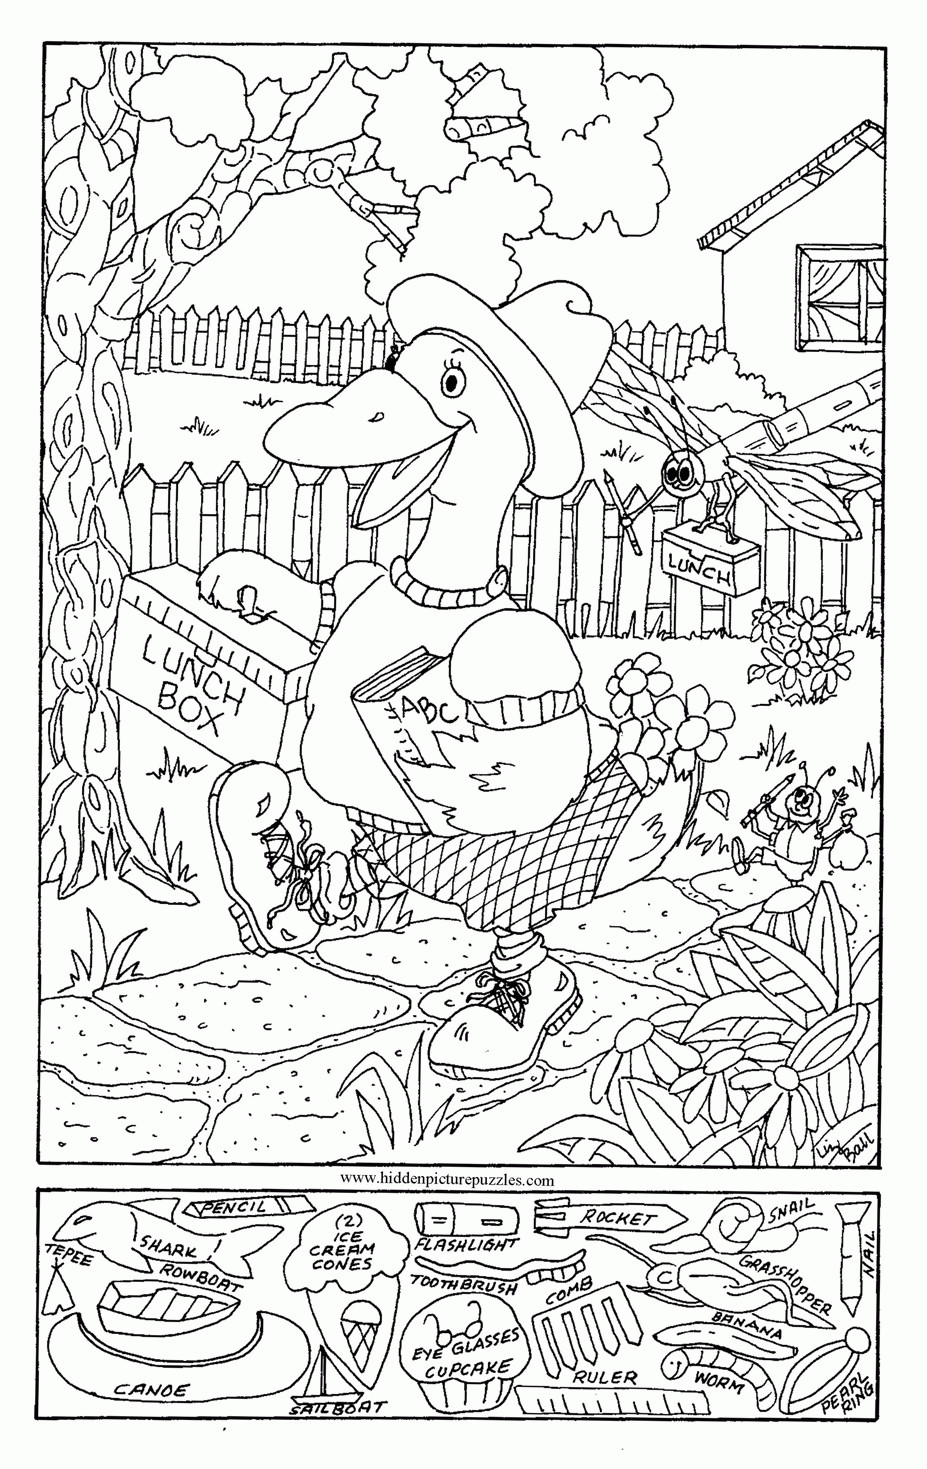 Middle School Coloring Pages
 Free Printable Coloring Pages For Middle School Students